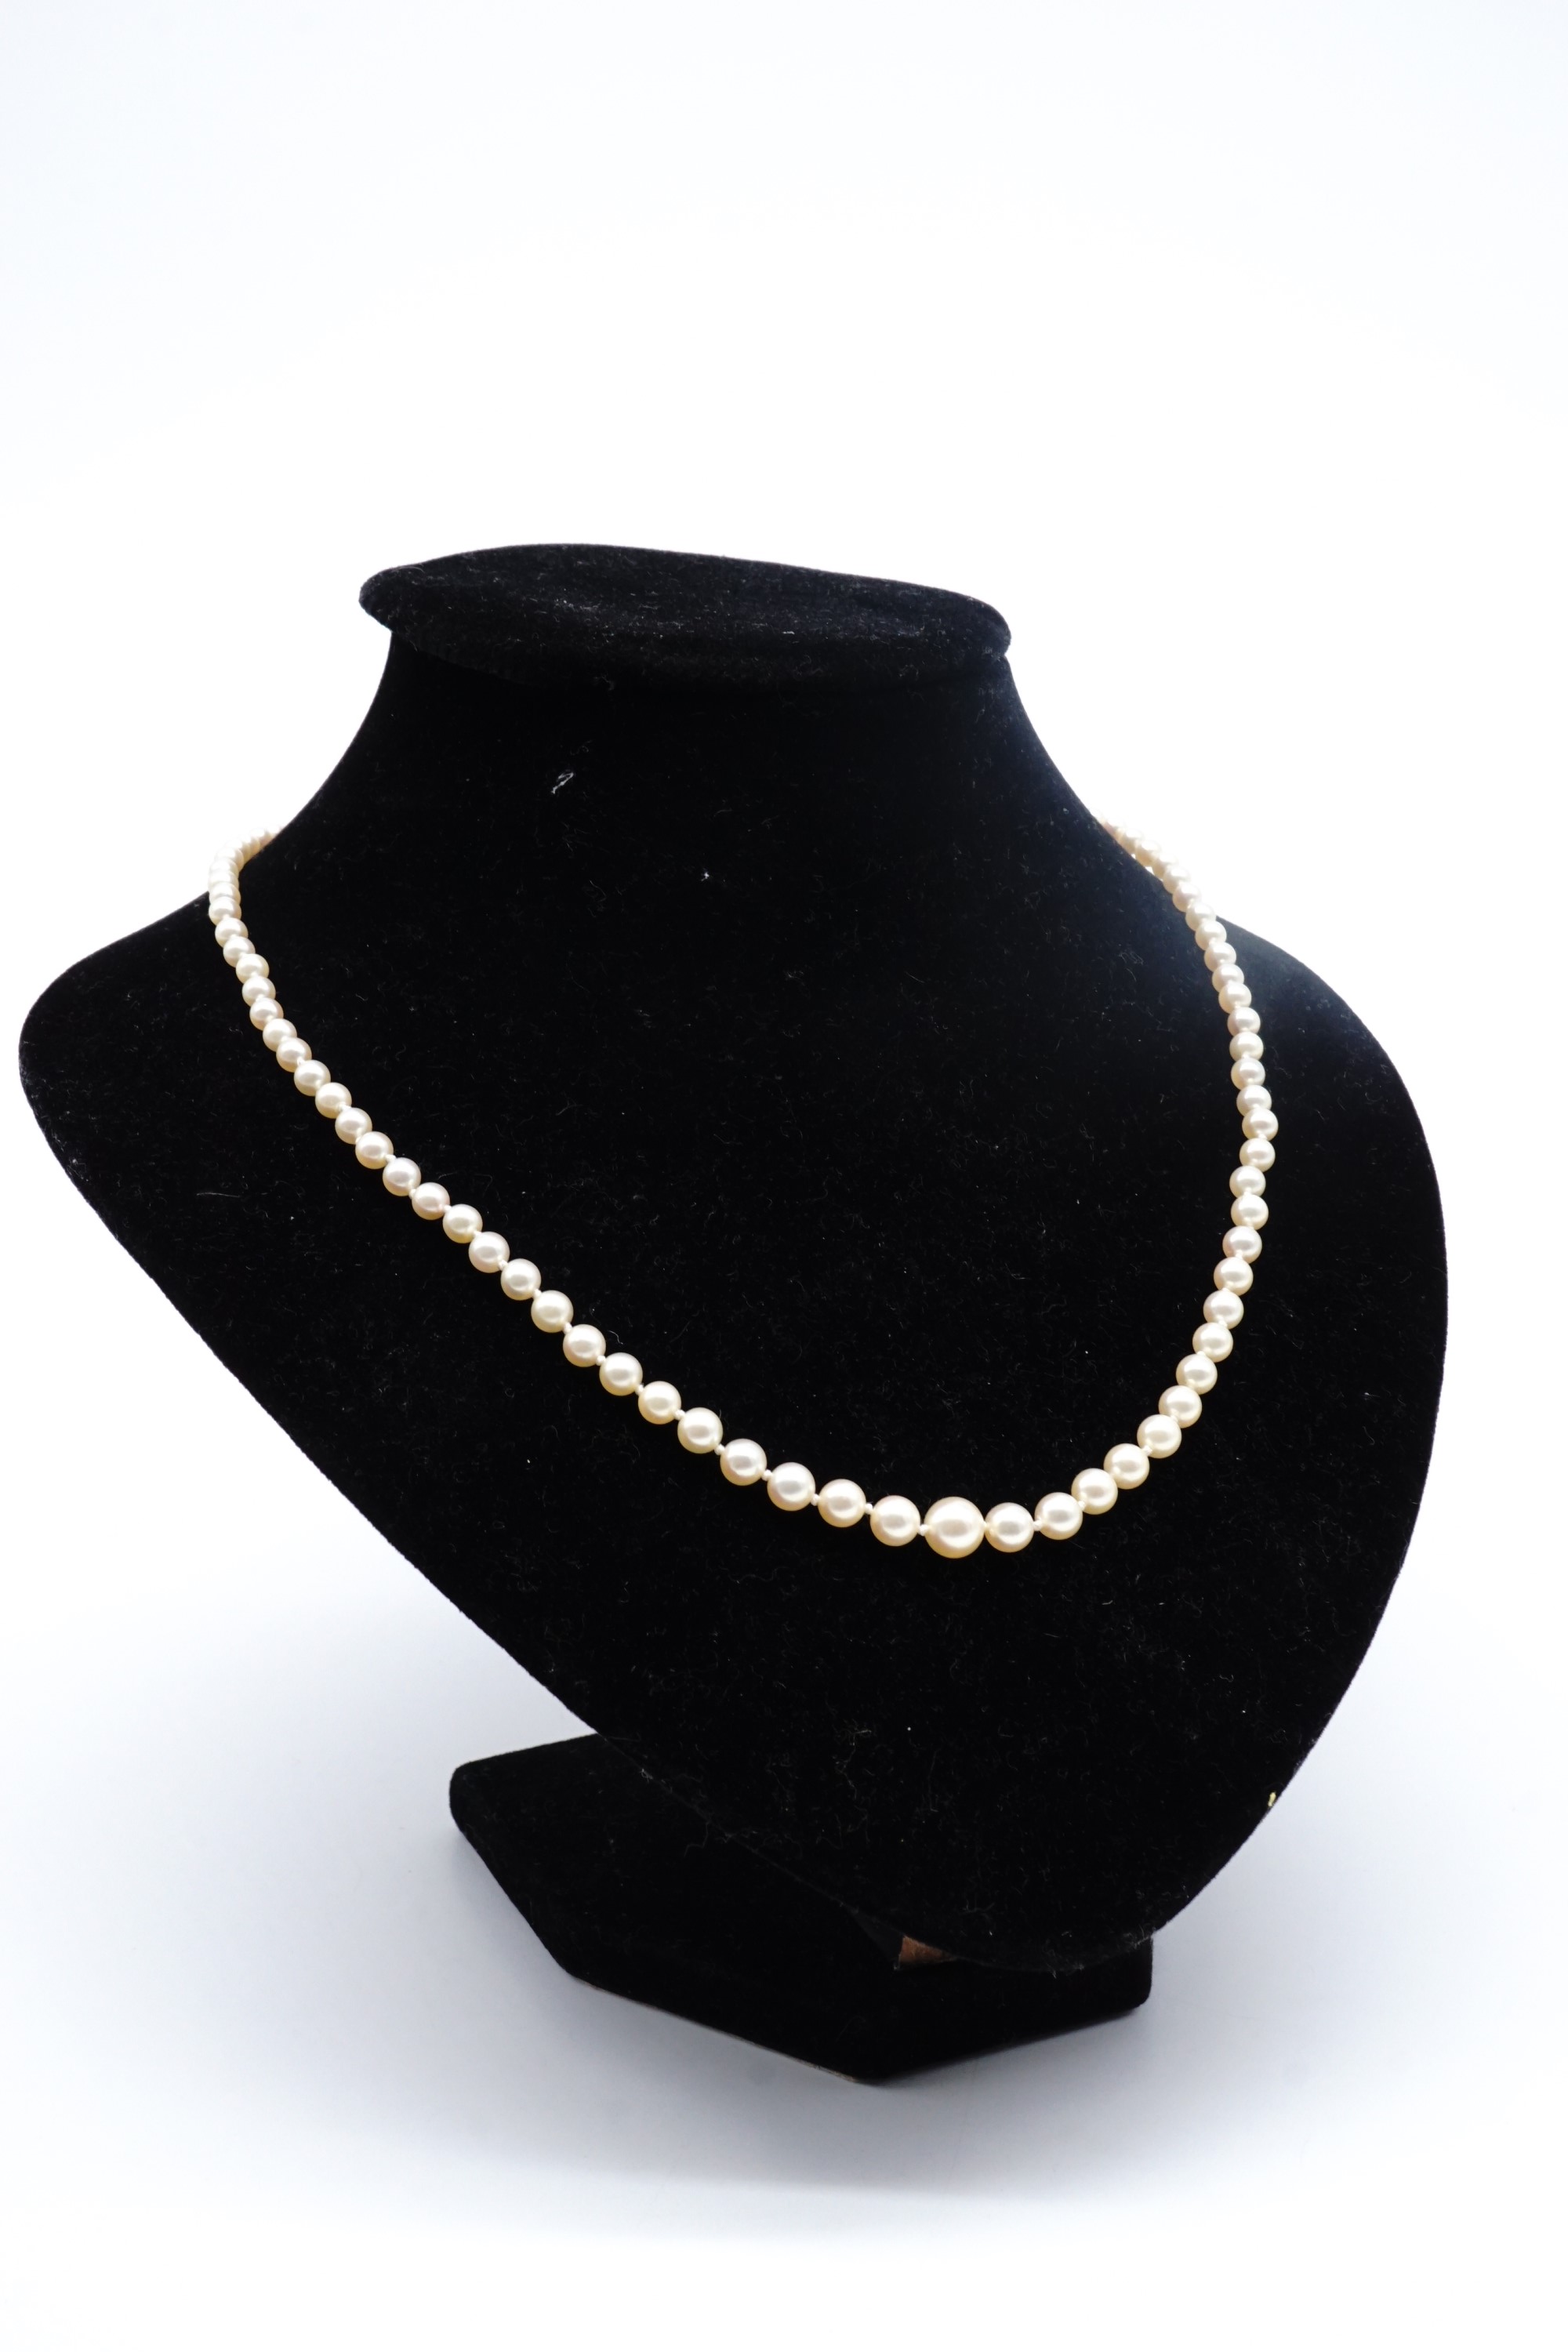 A single strand necklace of graded pearls, largest 7 mm, 49 cm - Image 2 of 3